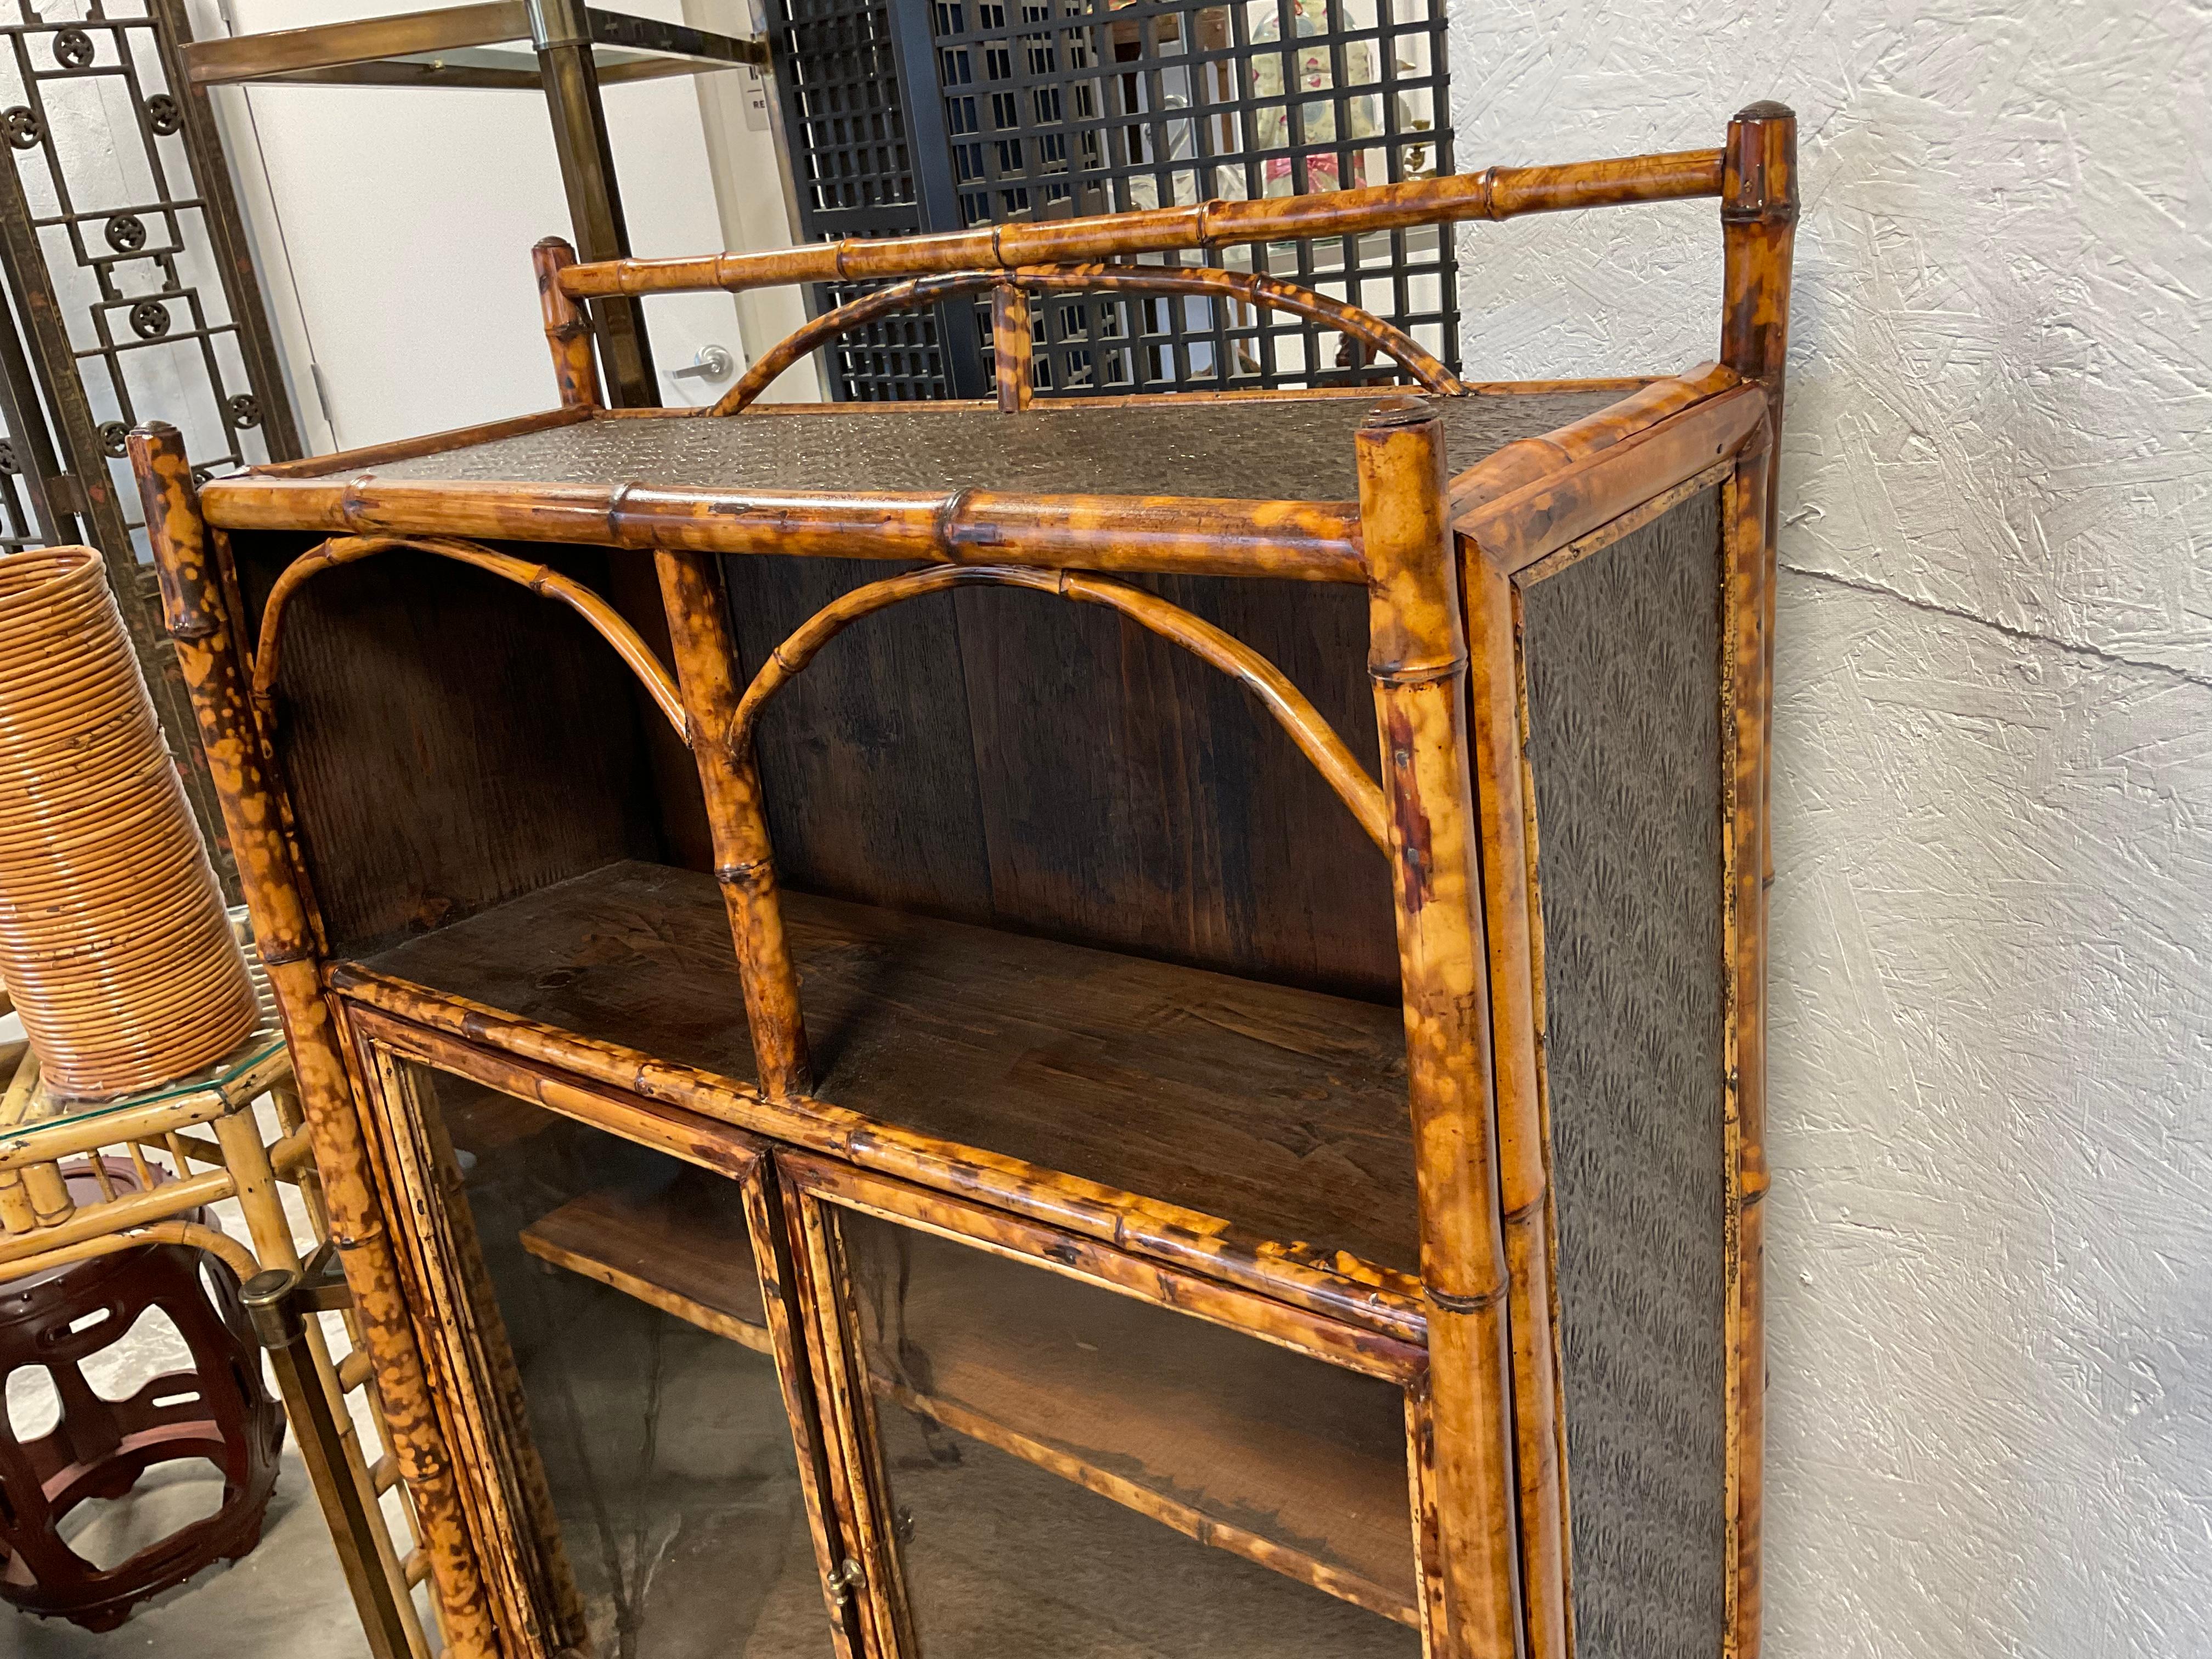 I have bought quite a few pieces of bamboo, over the years, but have never seen a piece, quite like this one. It has open shelving, glass encased shelving, and a single drawer. The piece has English embossed wallpaper, on the top, sides, and drawer